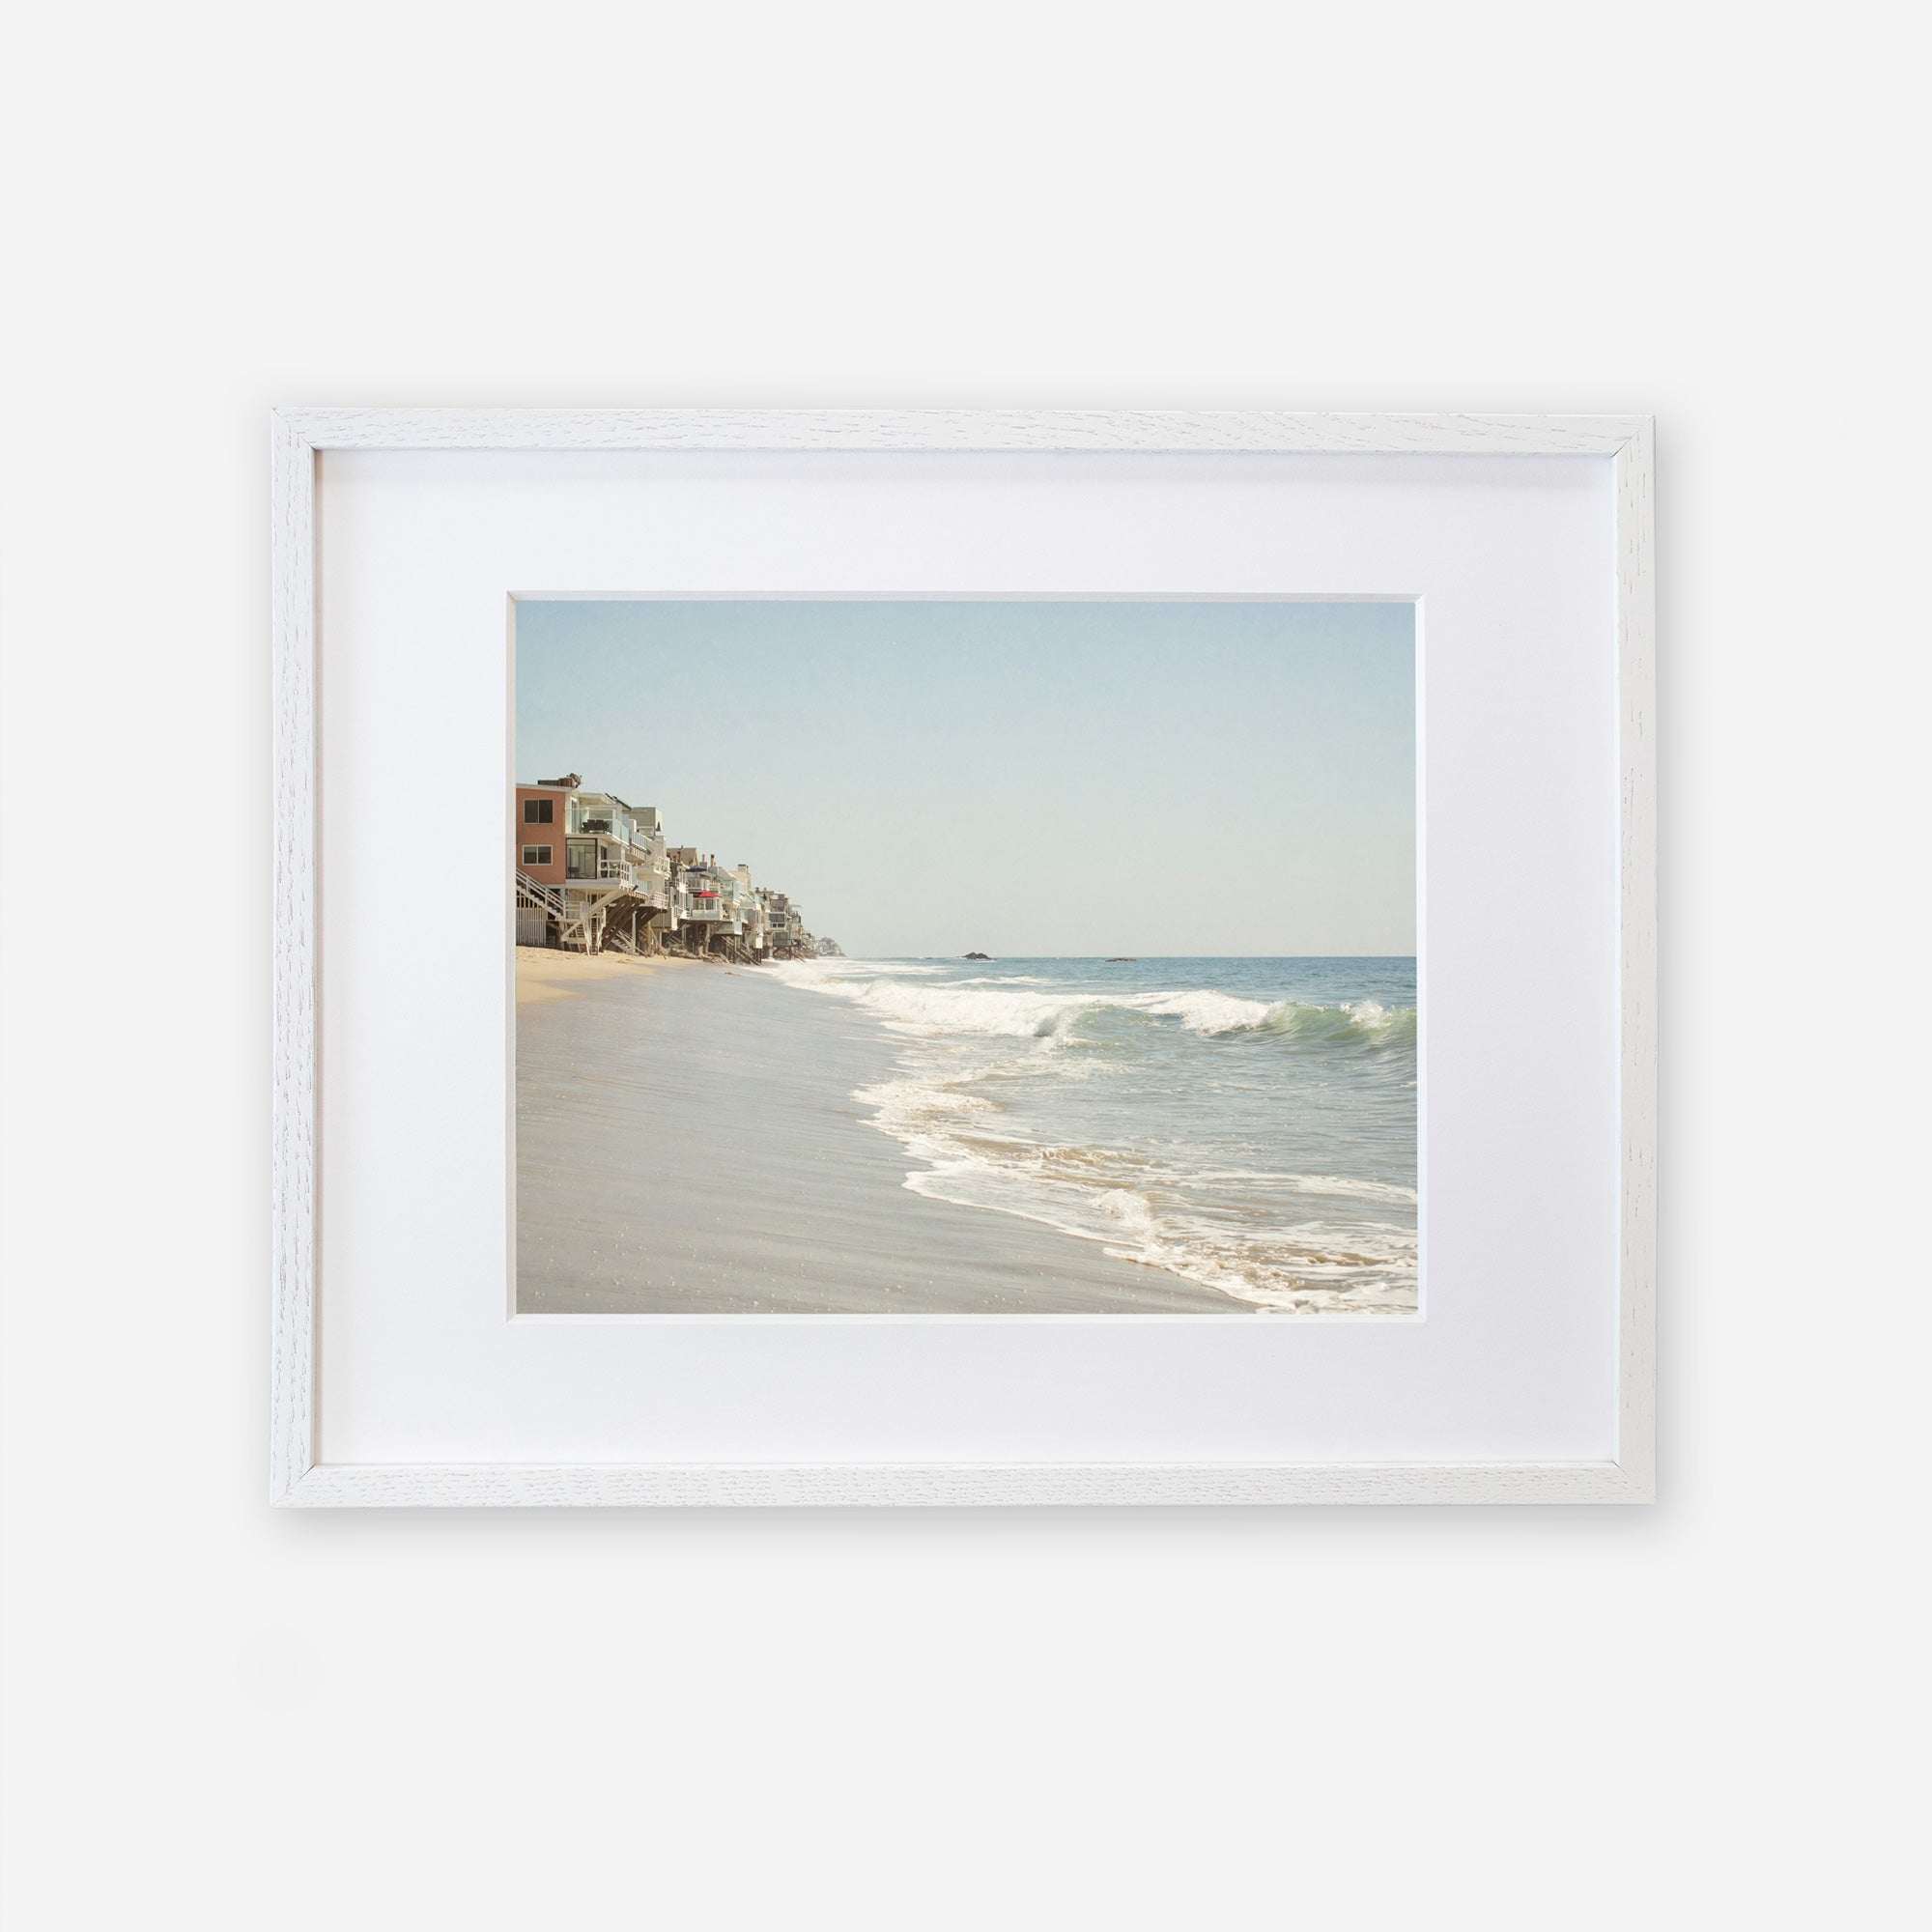 A framed Malibu Beach House Print, &#39;Ocean View&#39; of a serene Malibu coastline with waves gently lapping at the shore and a row of buildings extending along the coast under a clear sky by Offley Green.